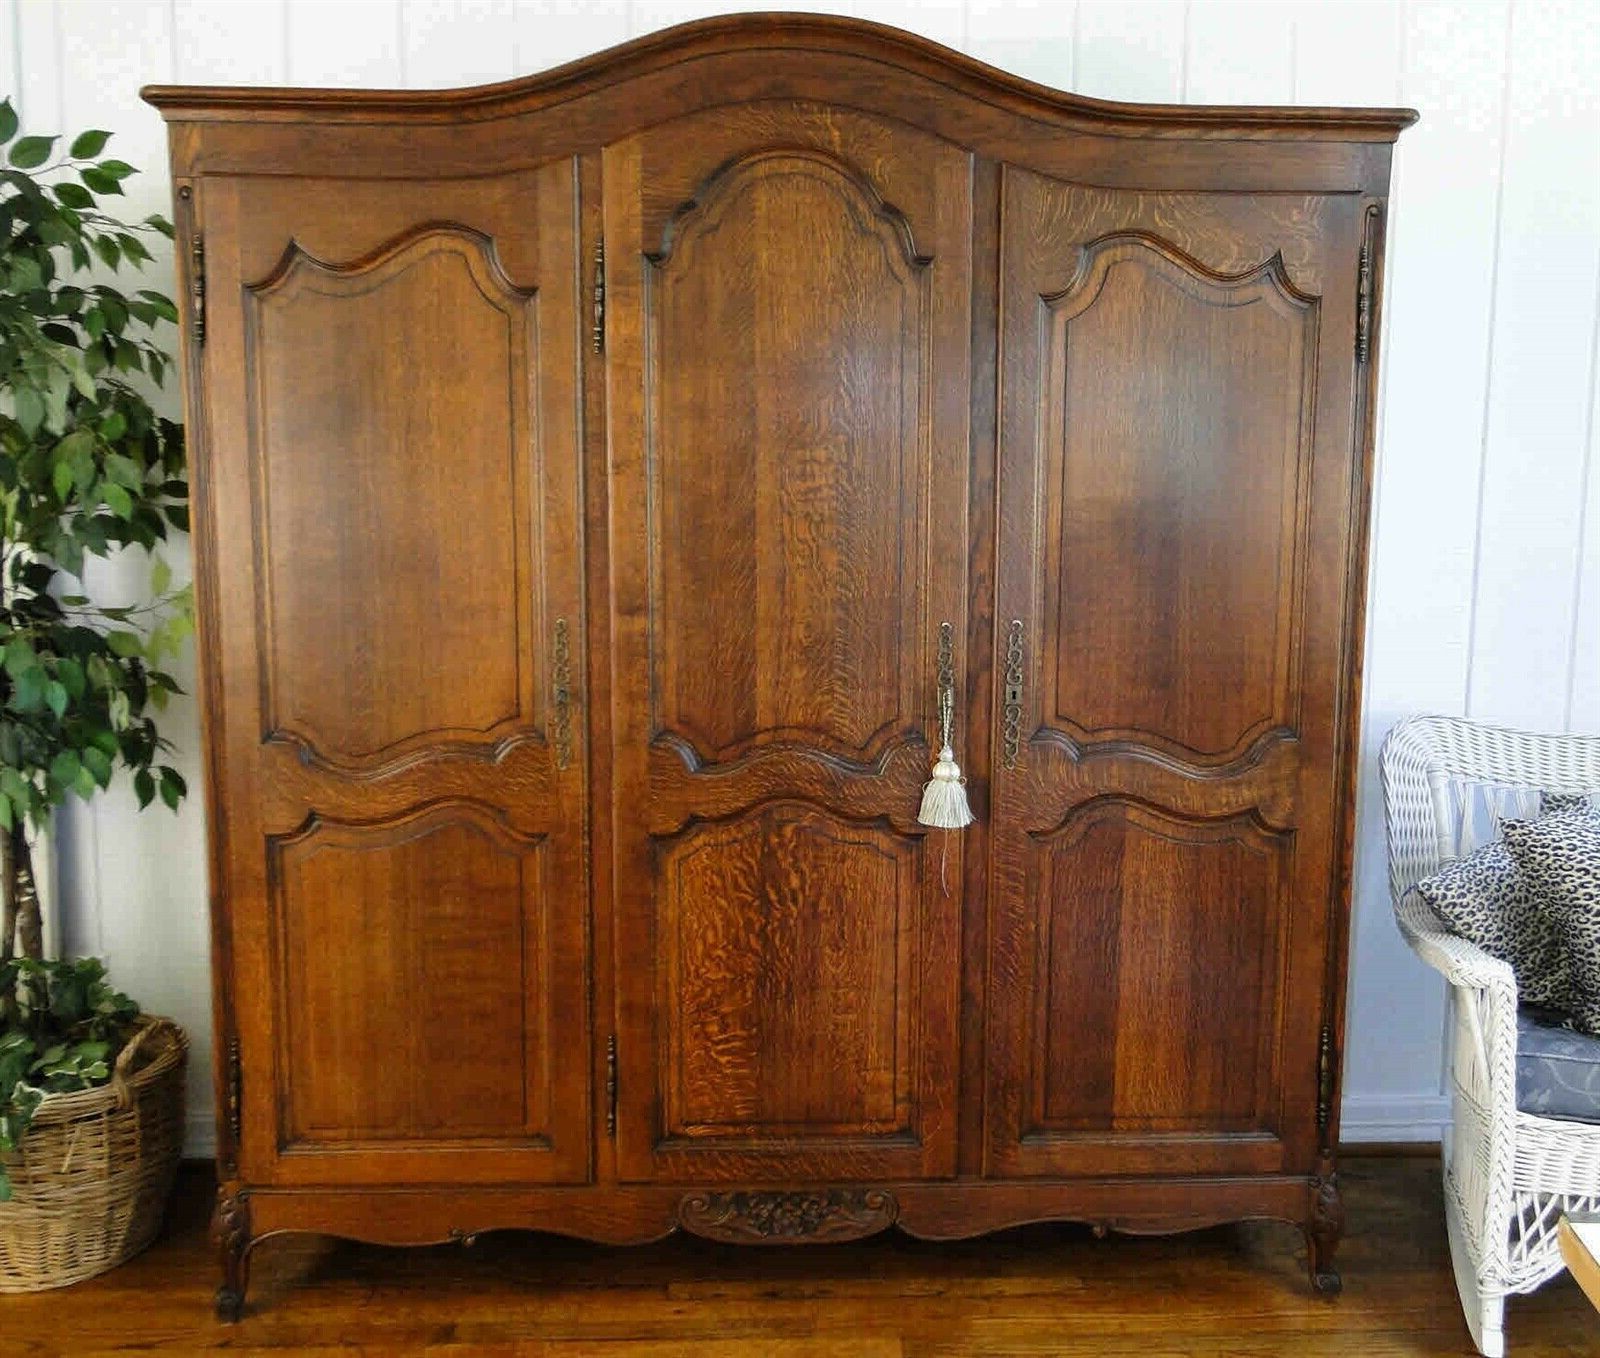 Antique French Country Wardrobe Tiger Oak Armoire 3 Door Shelves Hanging Rod Throughout Vintage French Wardrobes (Gallery 15 of 20)